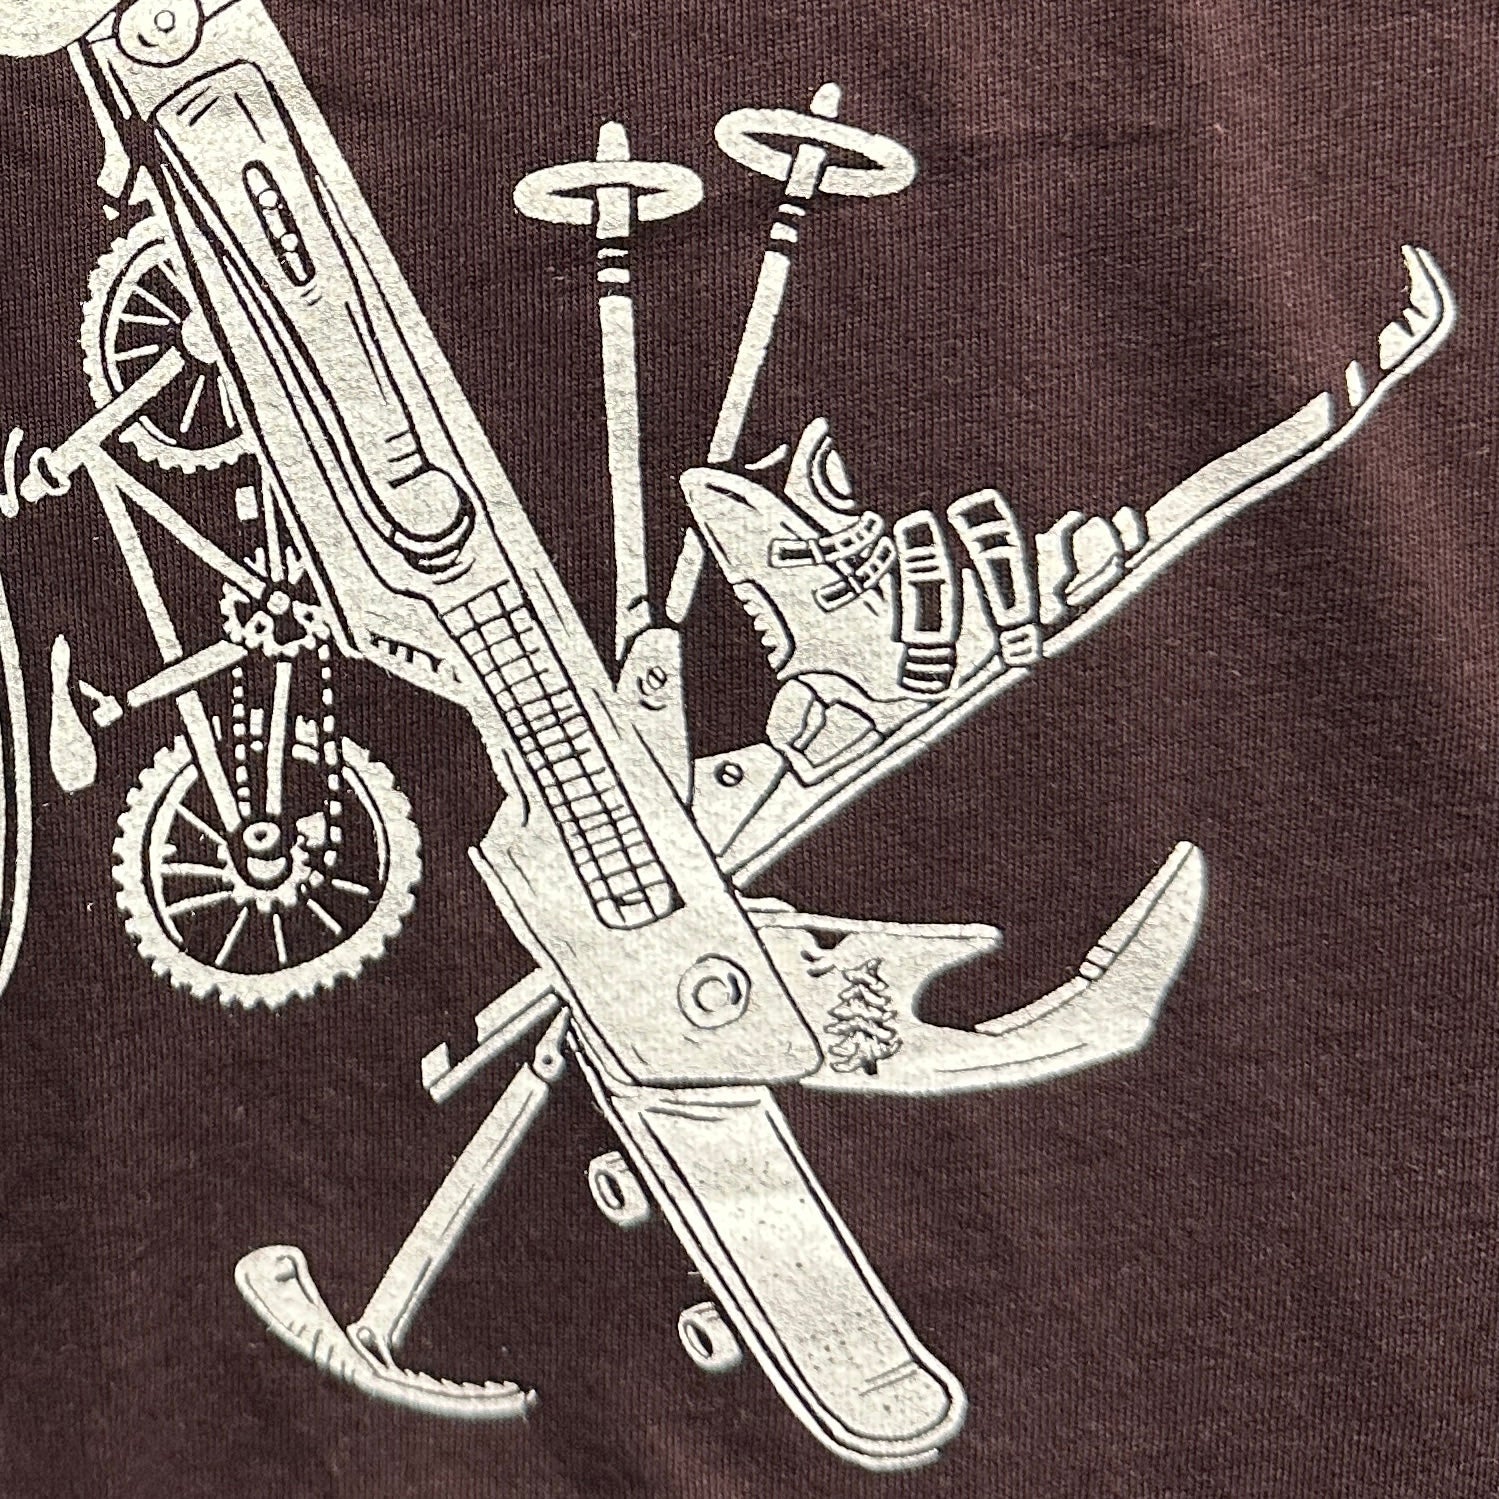 oxblood colored t-shirt with a white print of a multitool. The tools within the multitool are actually adventuring items- kayak, fishing pole, skis, ice axe, etc etc.